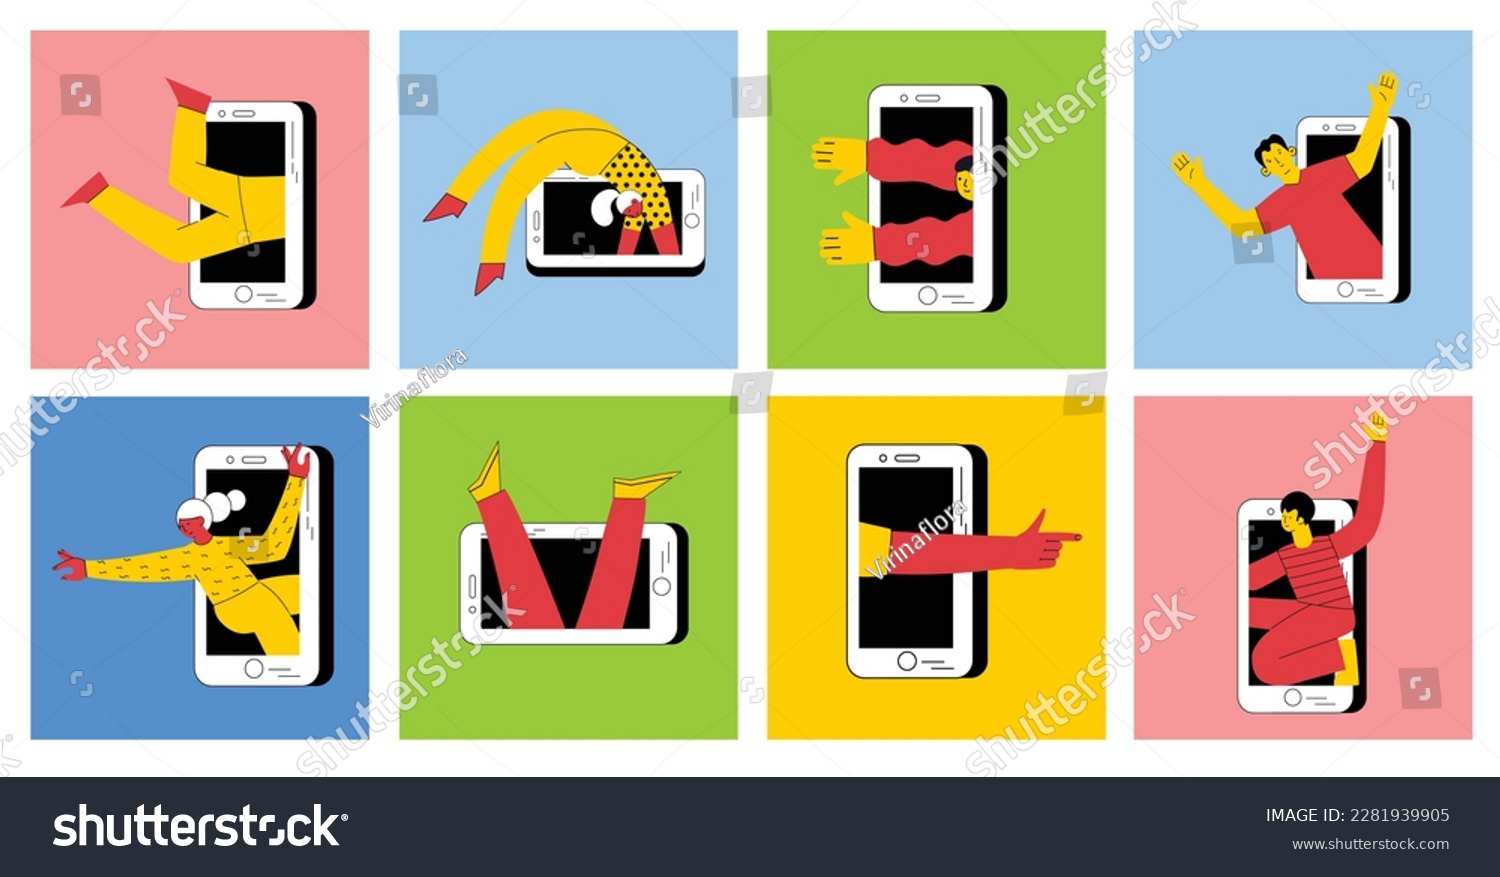 SVG of Technology of customers retention. Social media marketing and Dependence on the phone and the Internet. Illustration of the people fallen into a smartphone. Vector svg